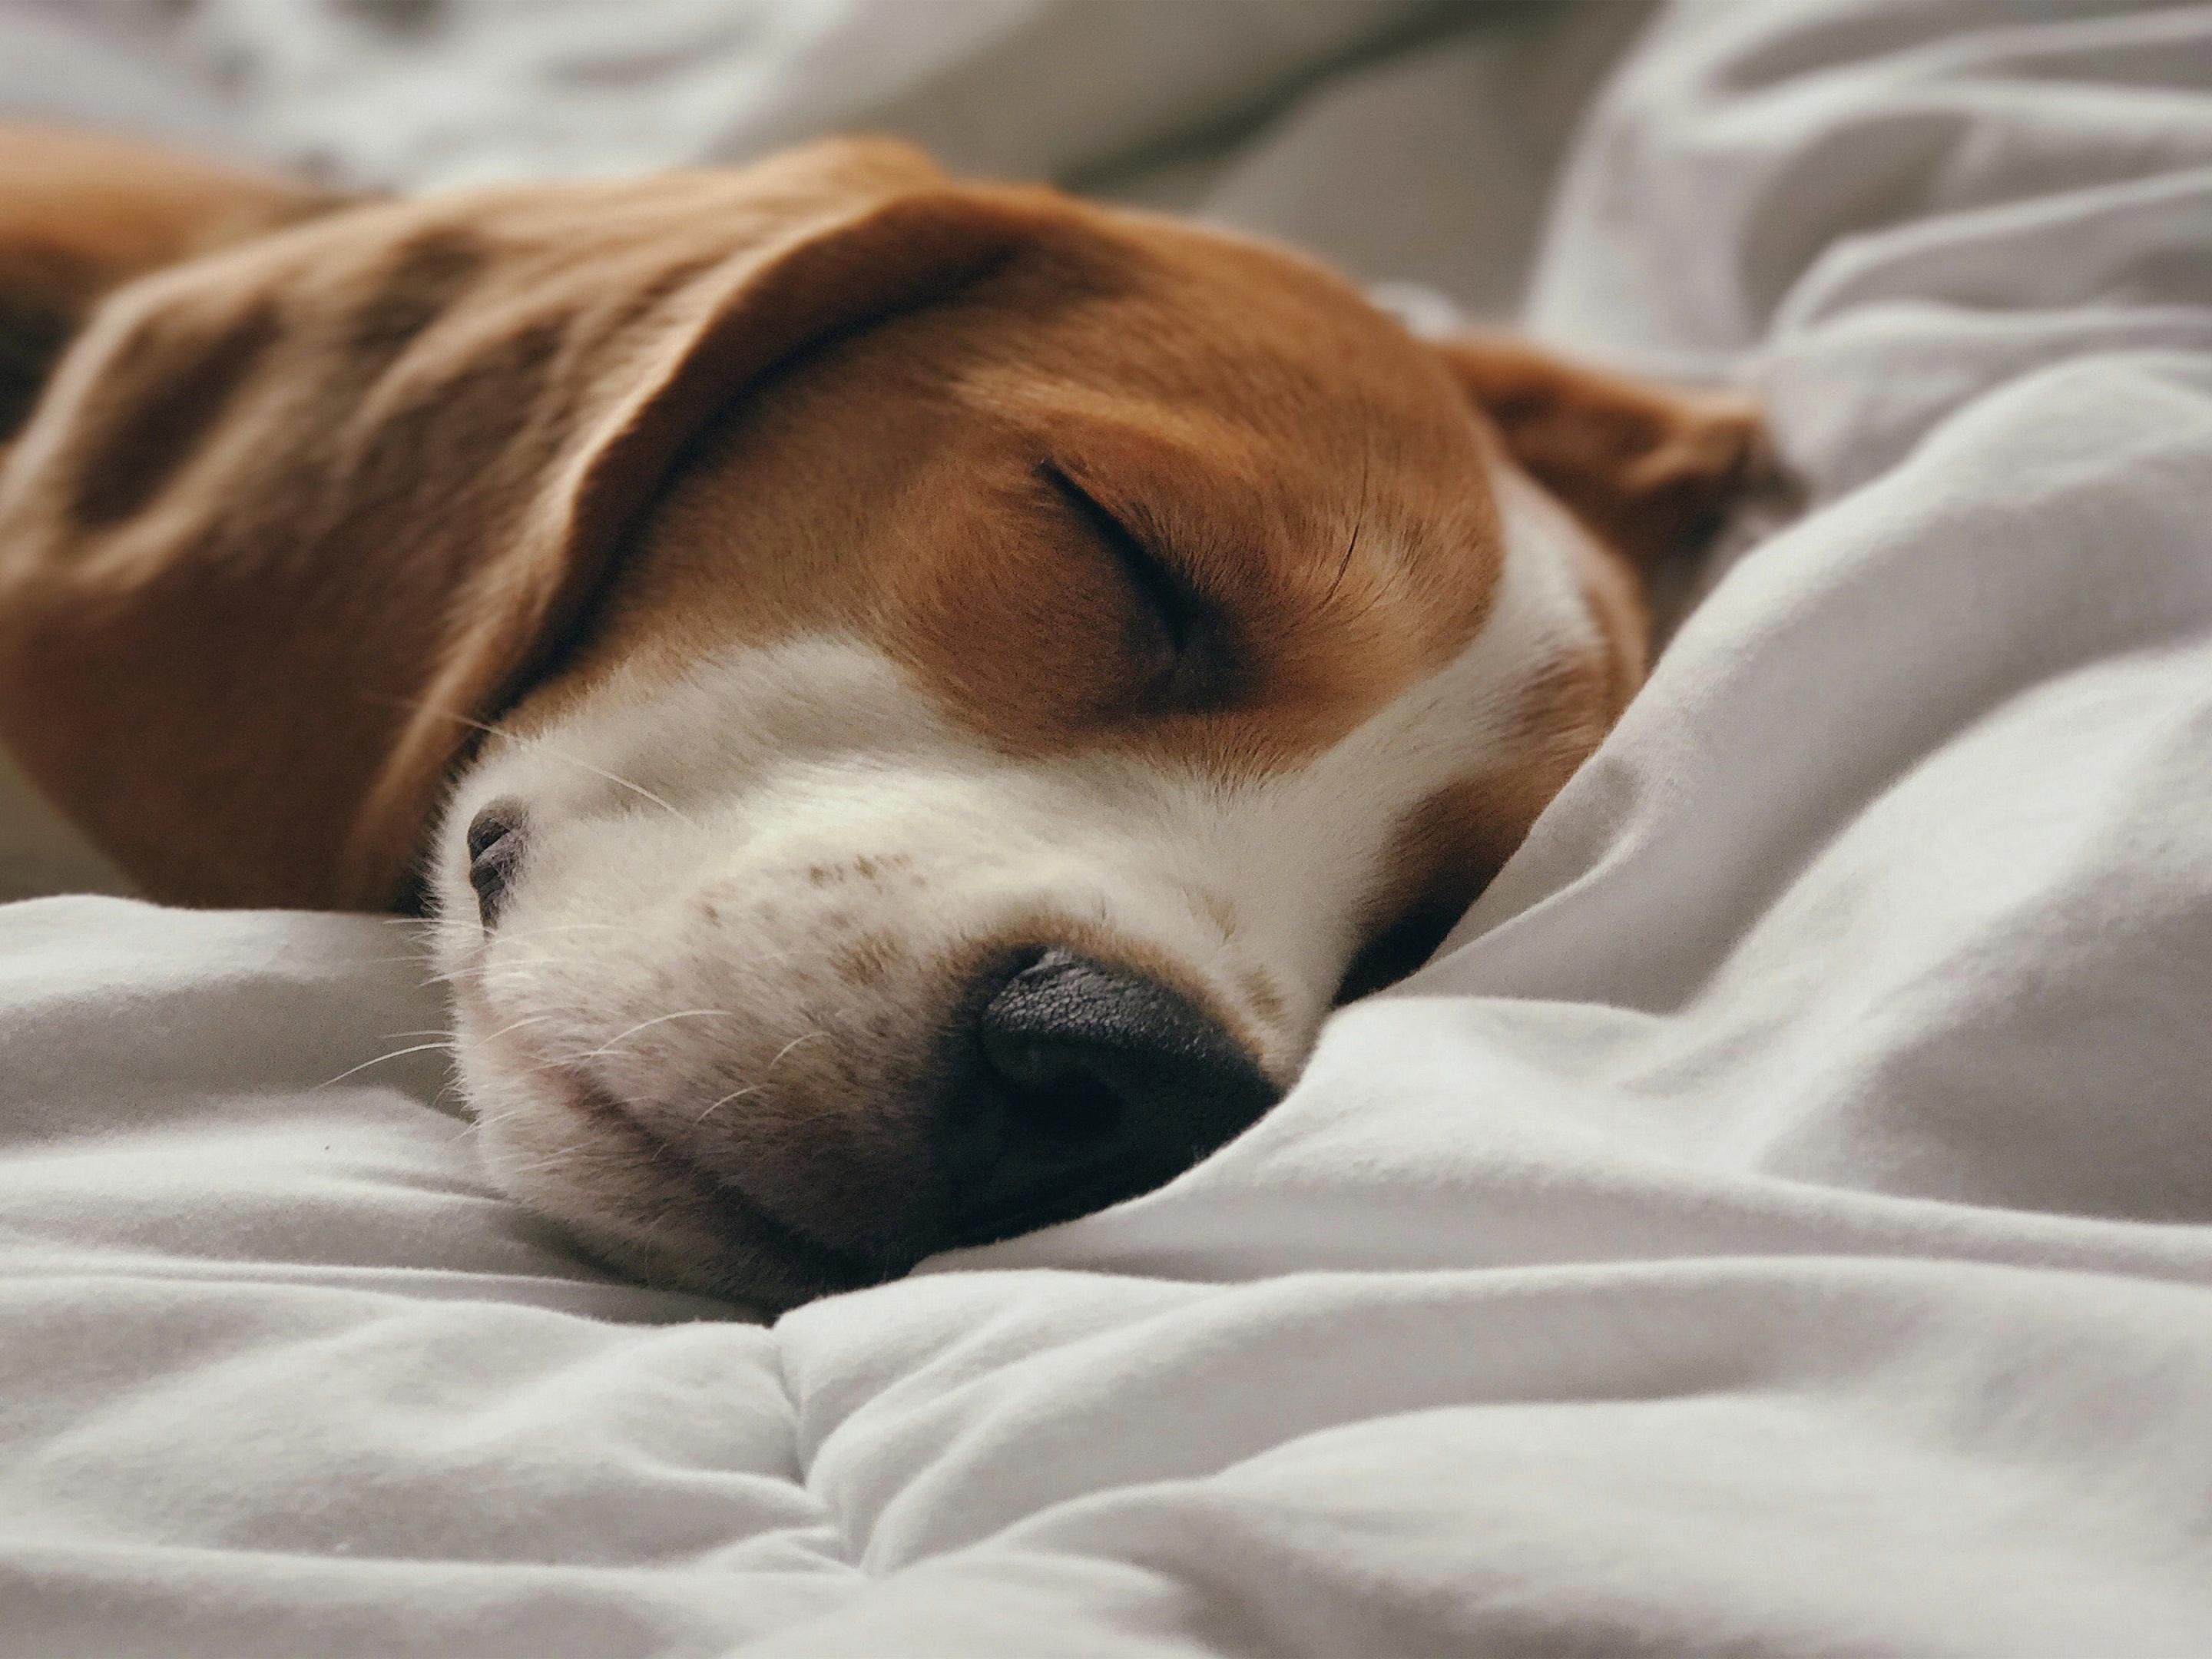 You don’t have to leave your furry friends behind when you stay with us. Dogs and cats are welcome at our hotel with a per-stay fee of $100 for up to 2 pets. Call ahead to learn more about our pet policy and get ready for a fur-bulous trip to Alpharetta.